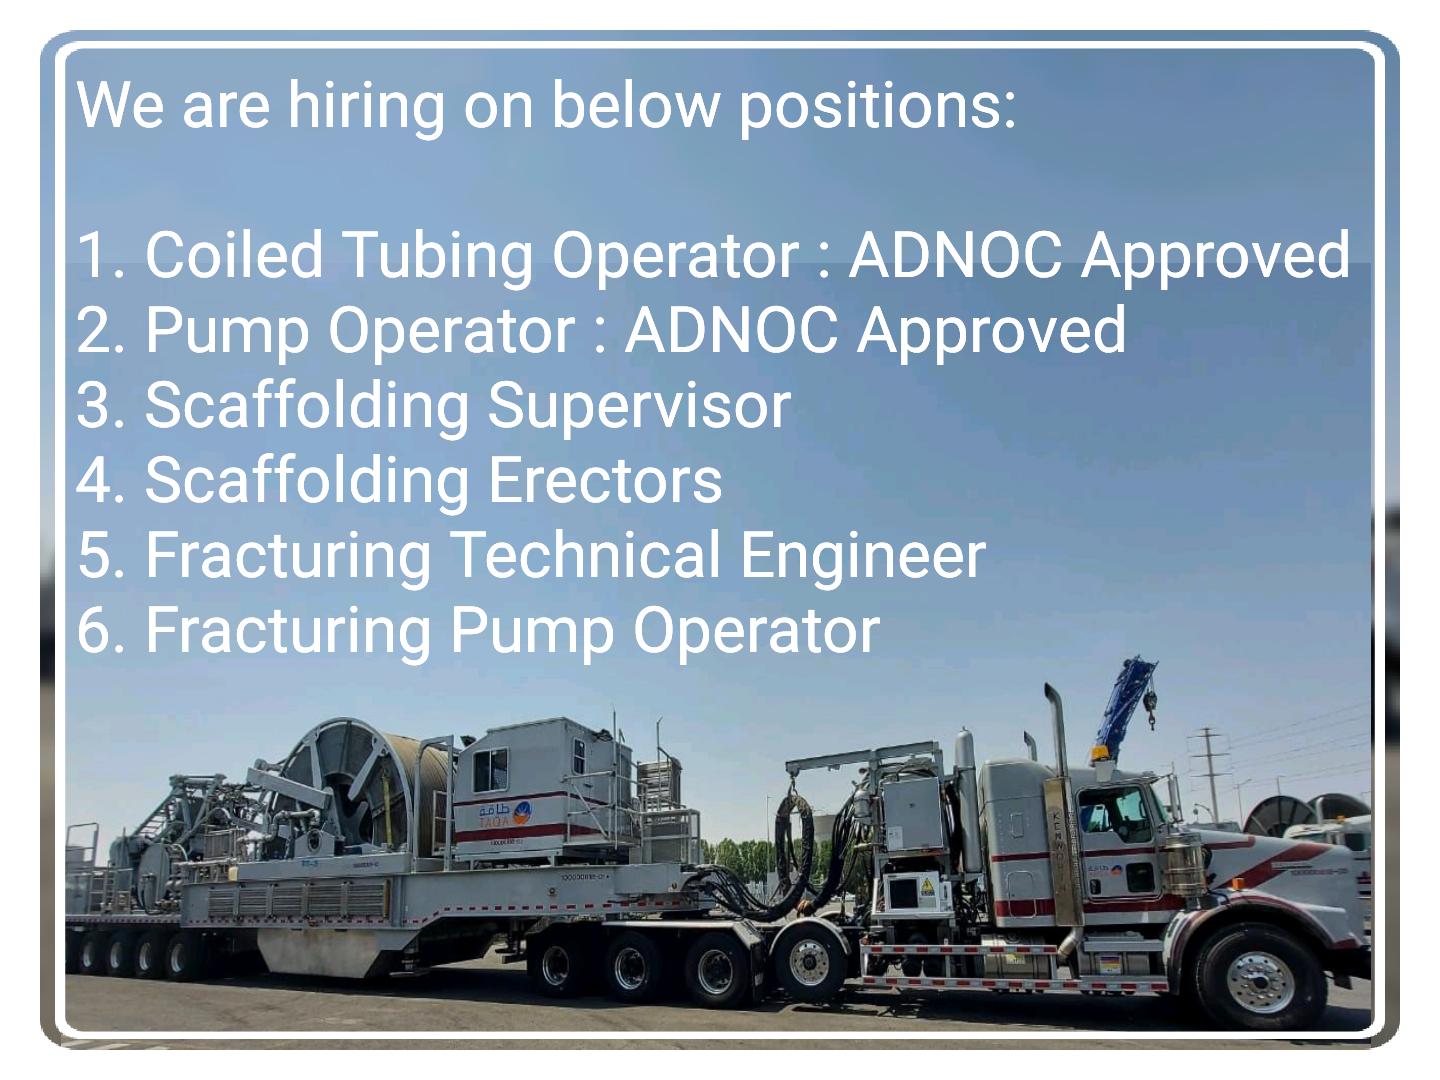 Coiled Tubing, Pump Operator, Scaffolding & Fracturing Engineer Jobs